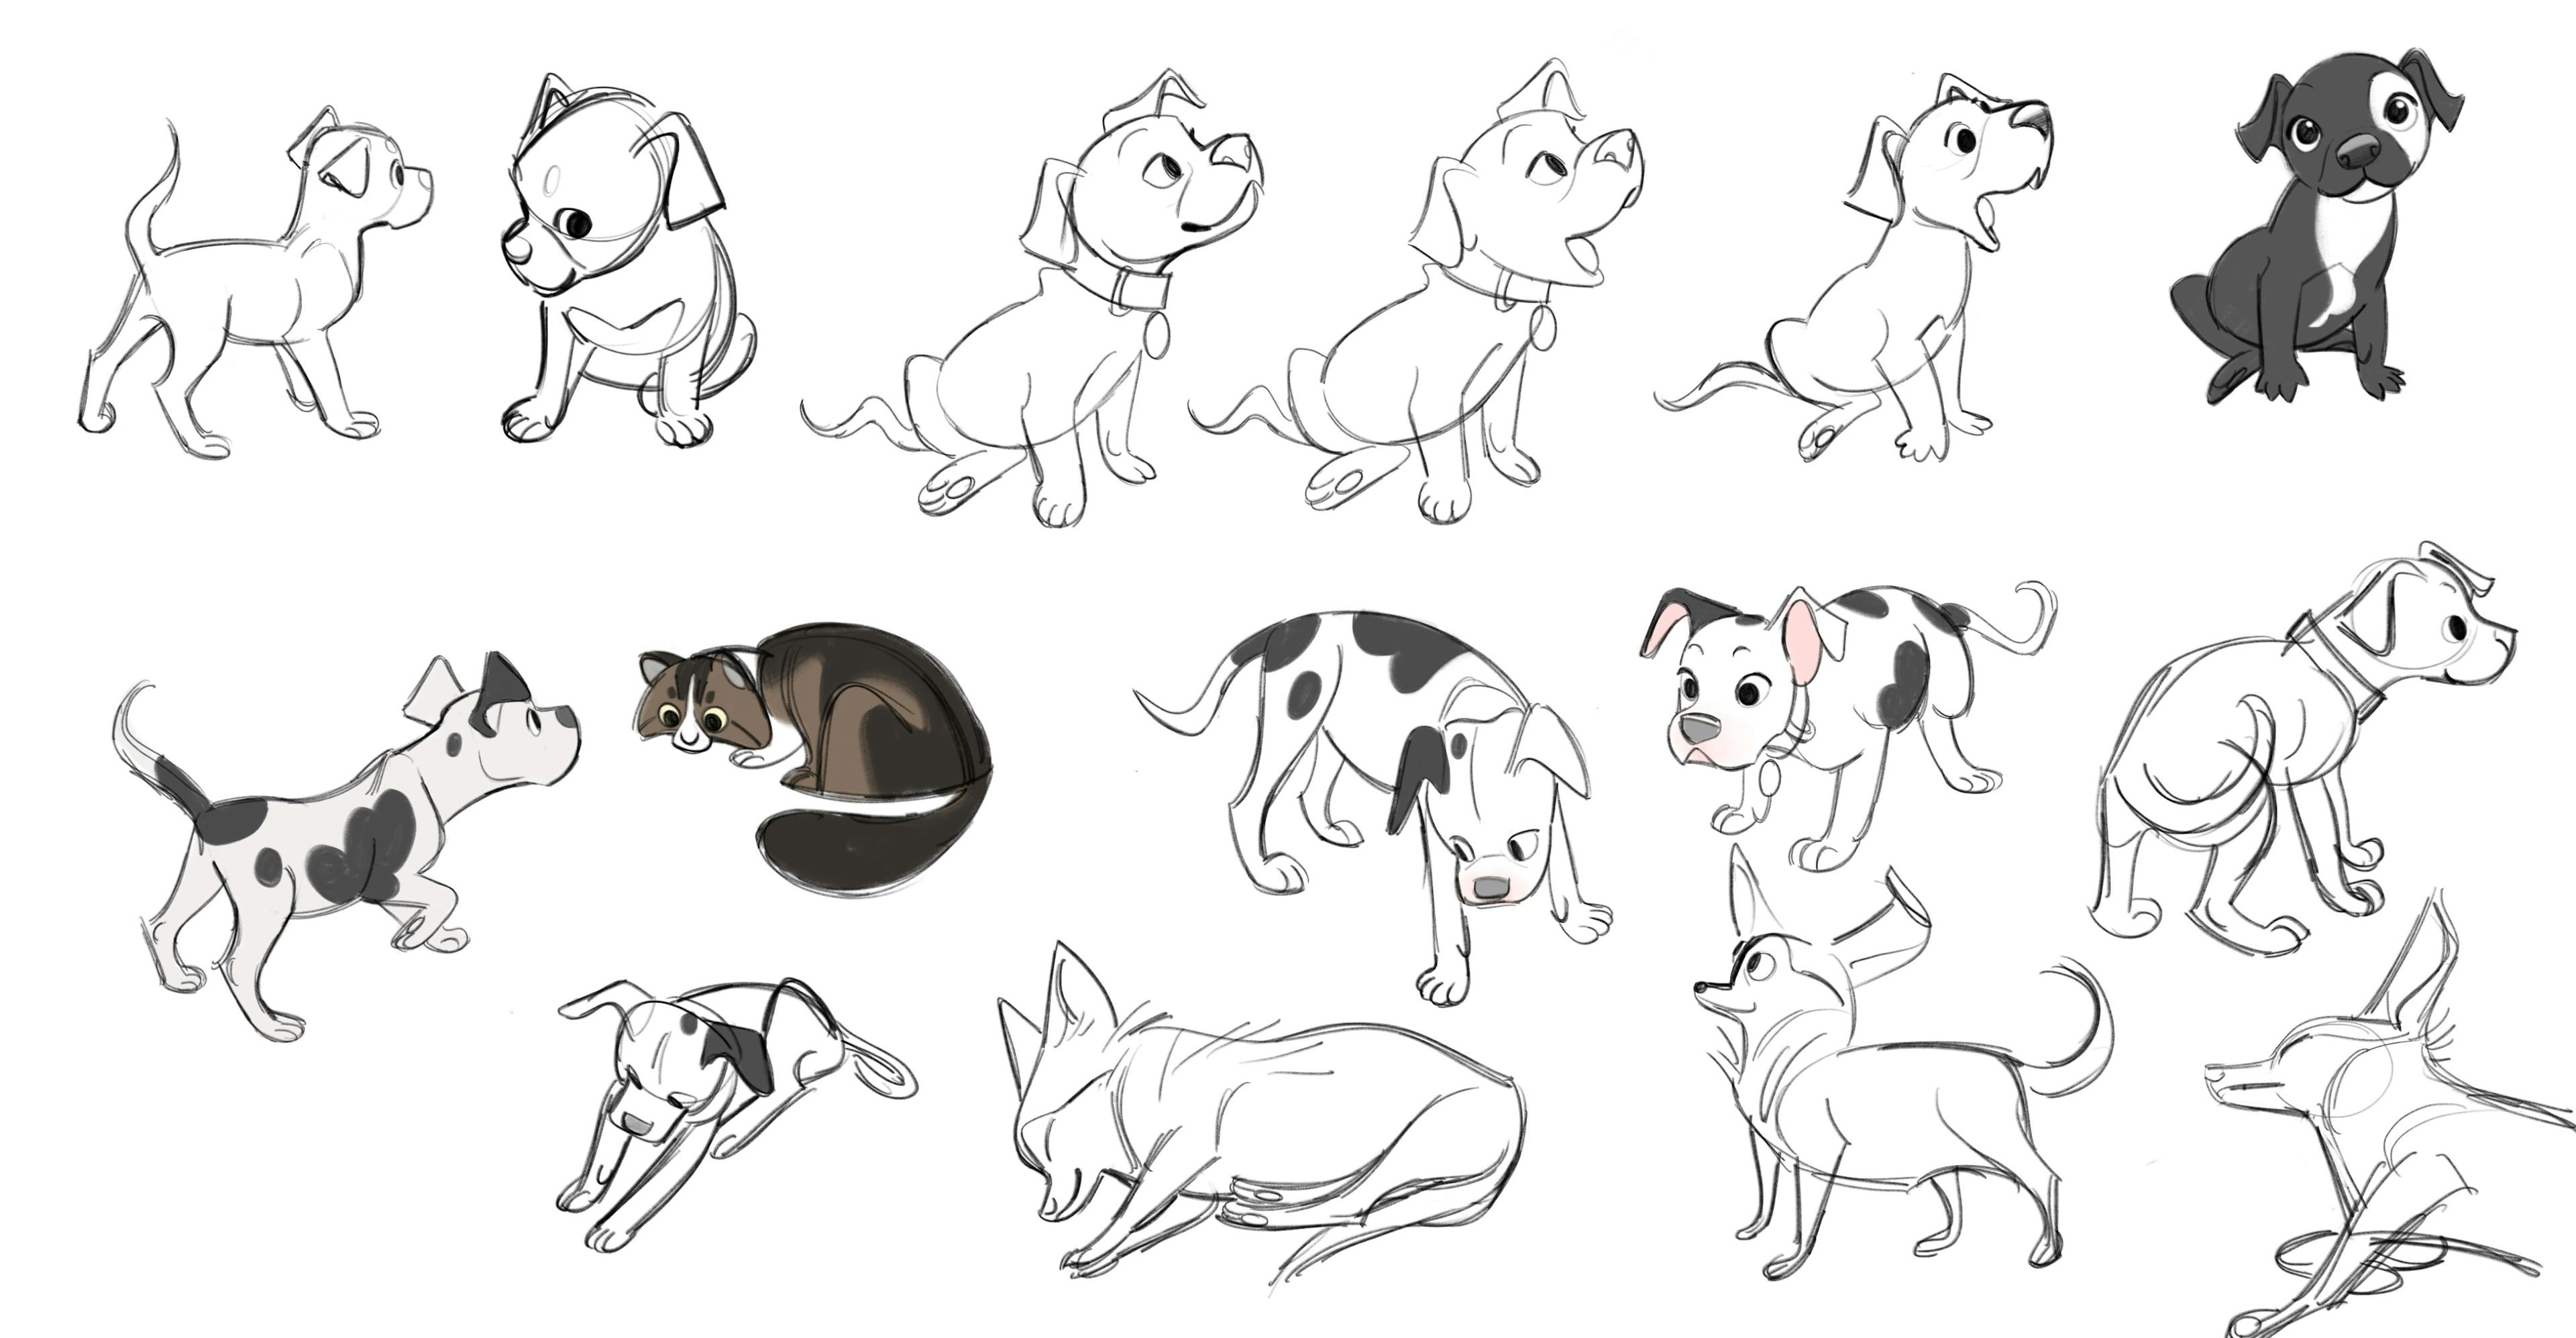 Concept art of dogs